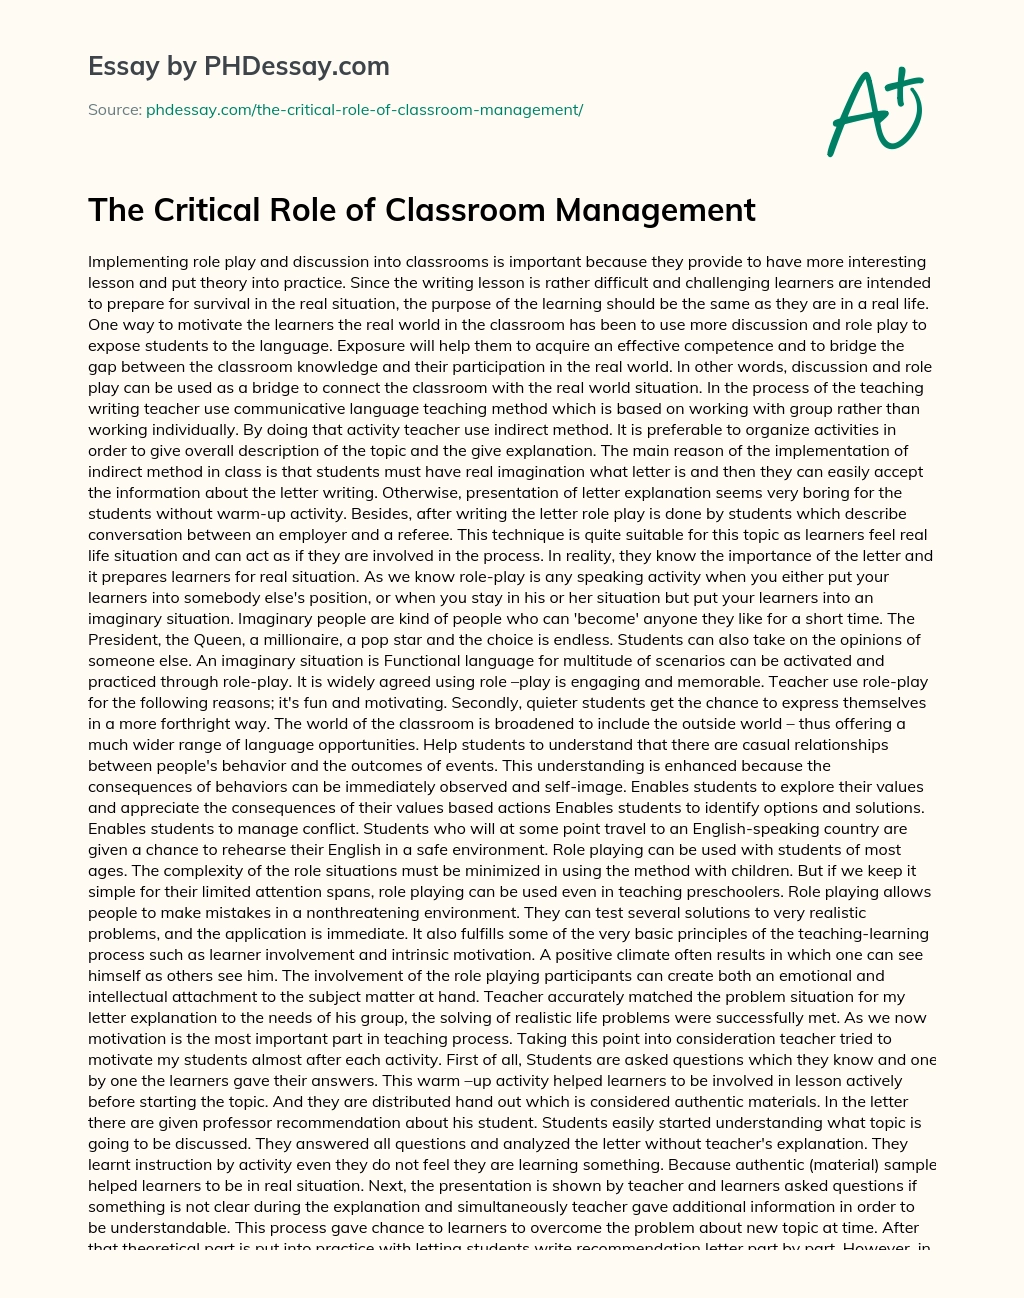 The Critical Role of Classroom Management essay